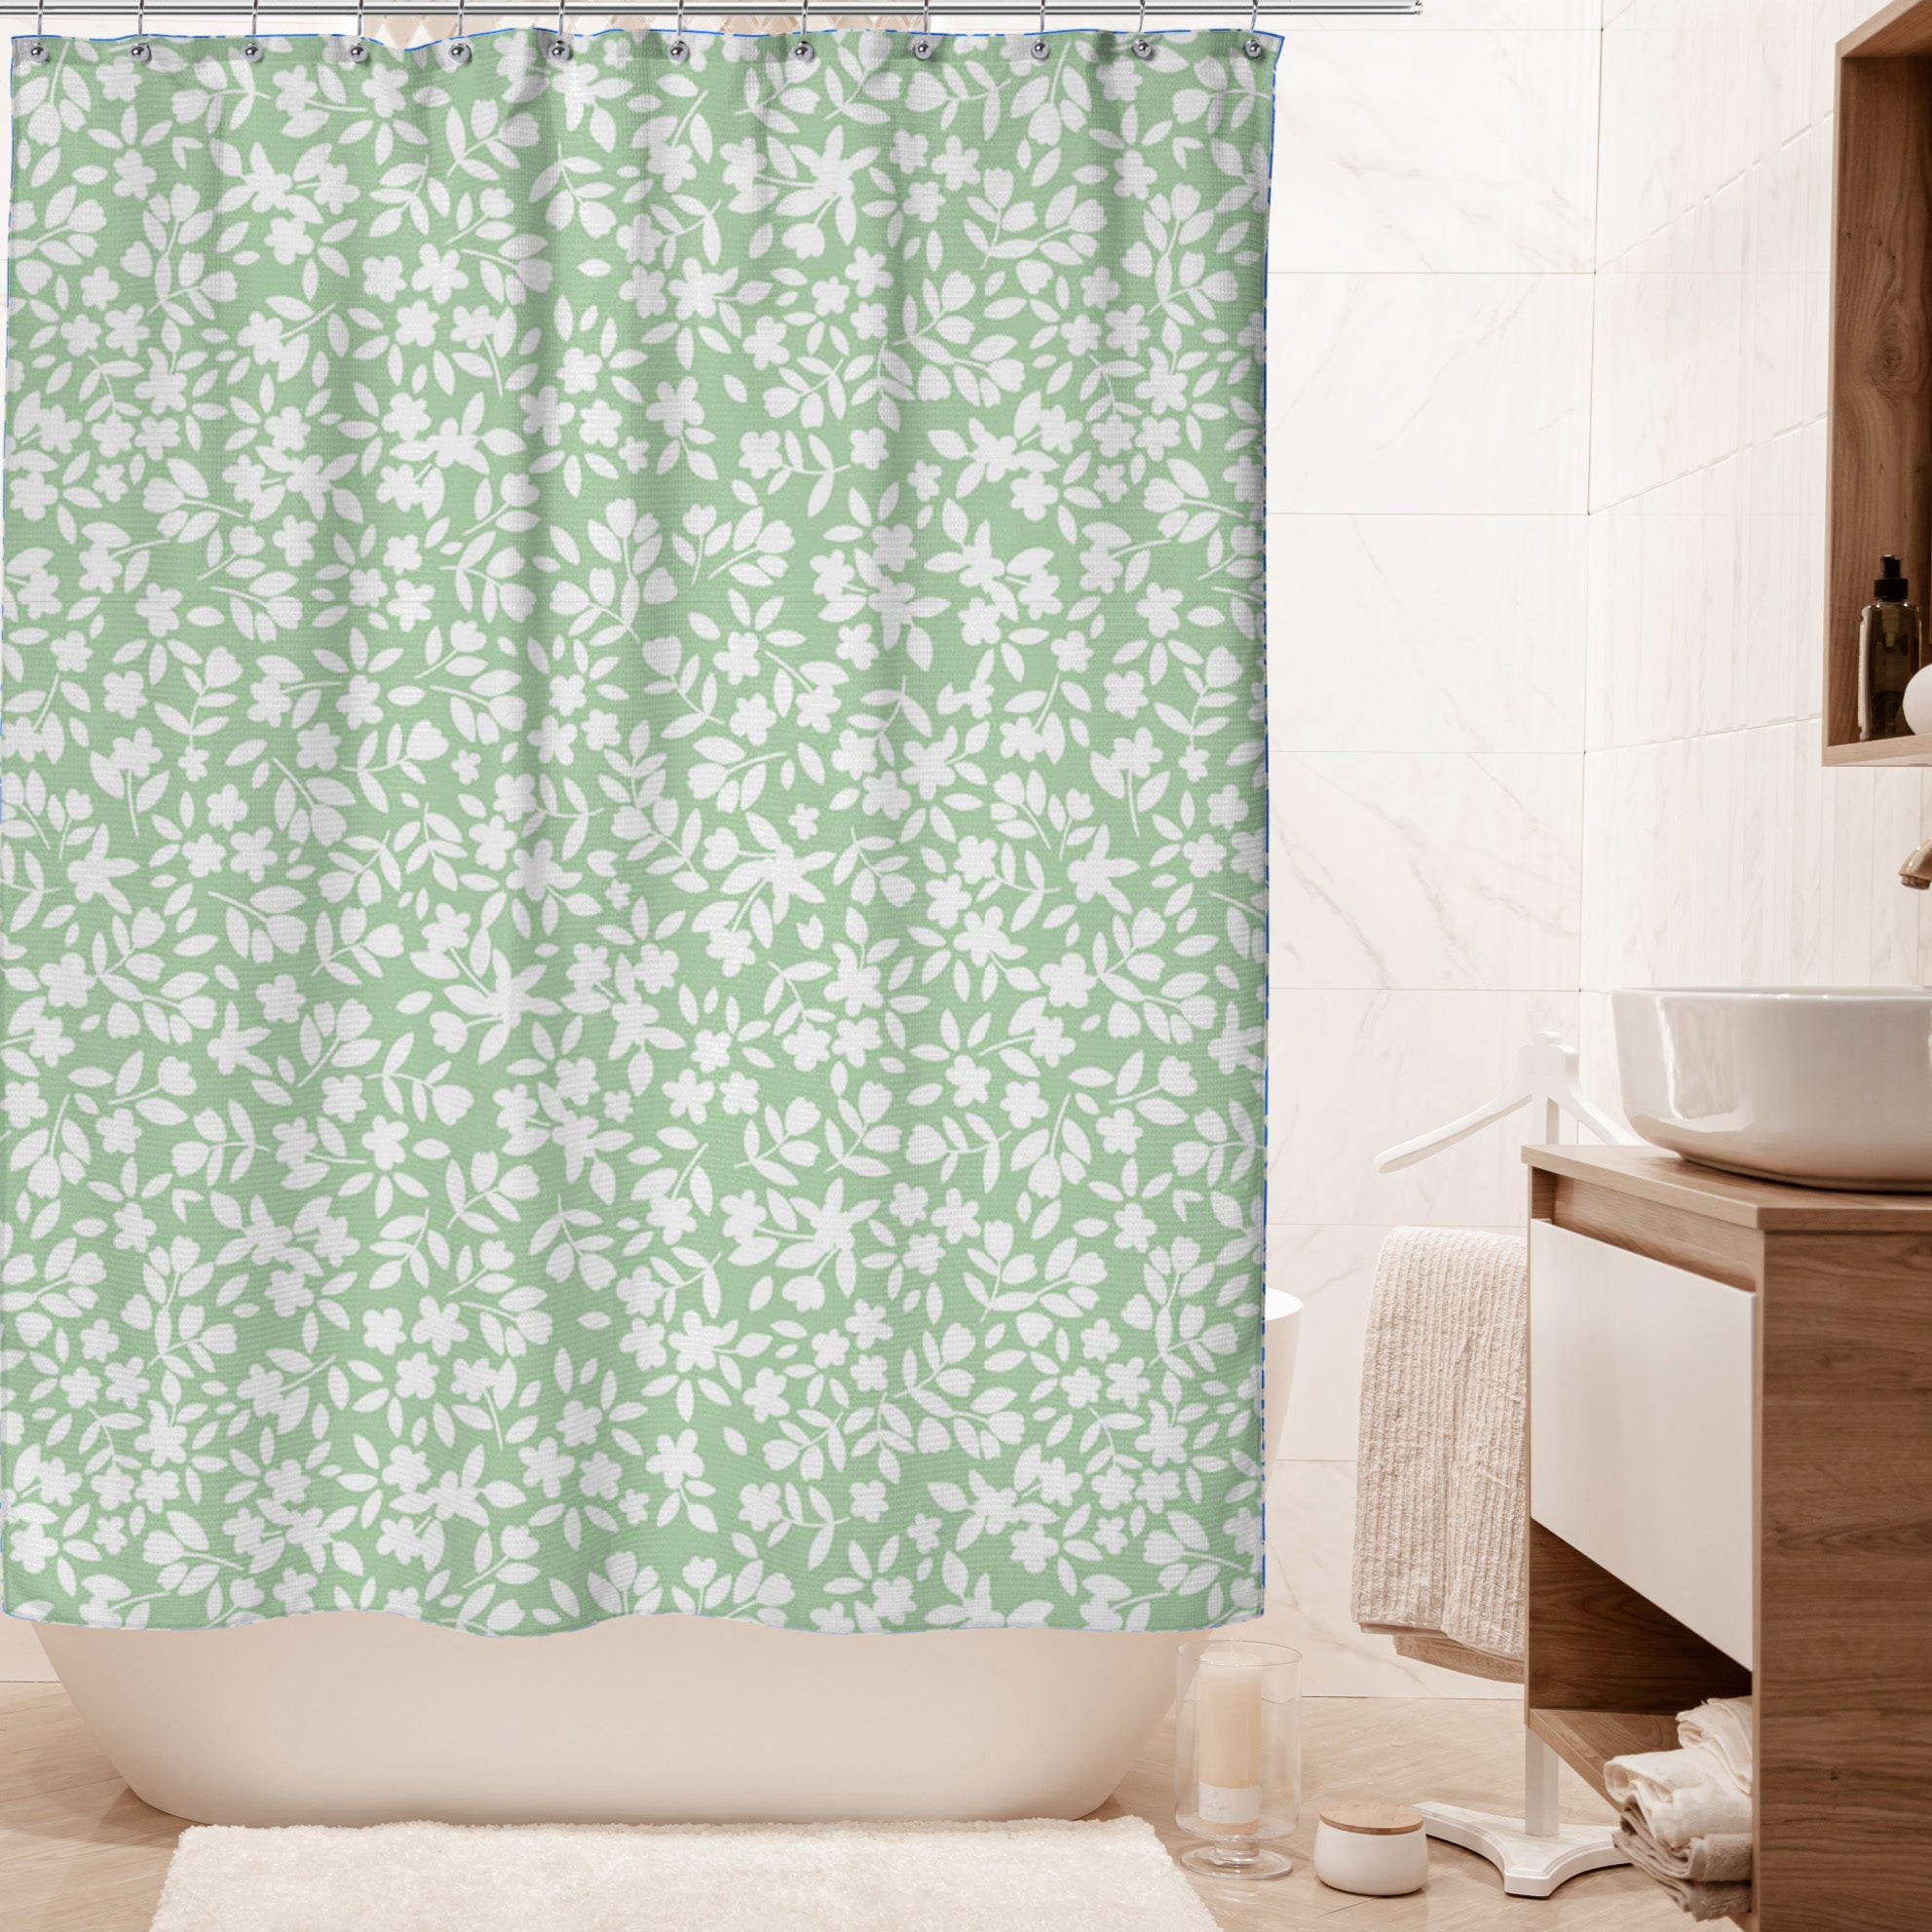 Navy Blue White Periwinkle Flowers Botanical Floral Shower Curtain